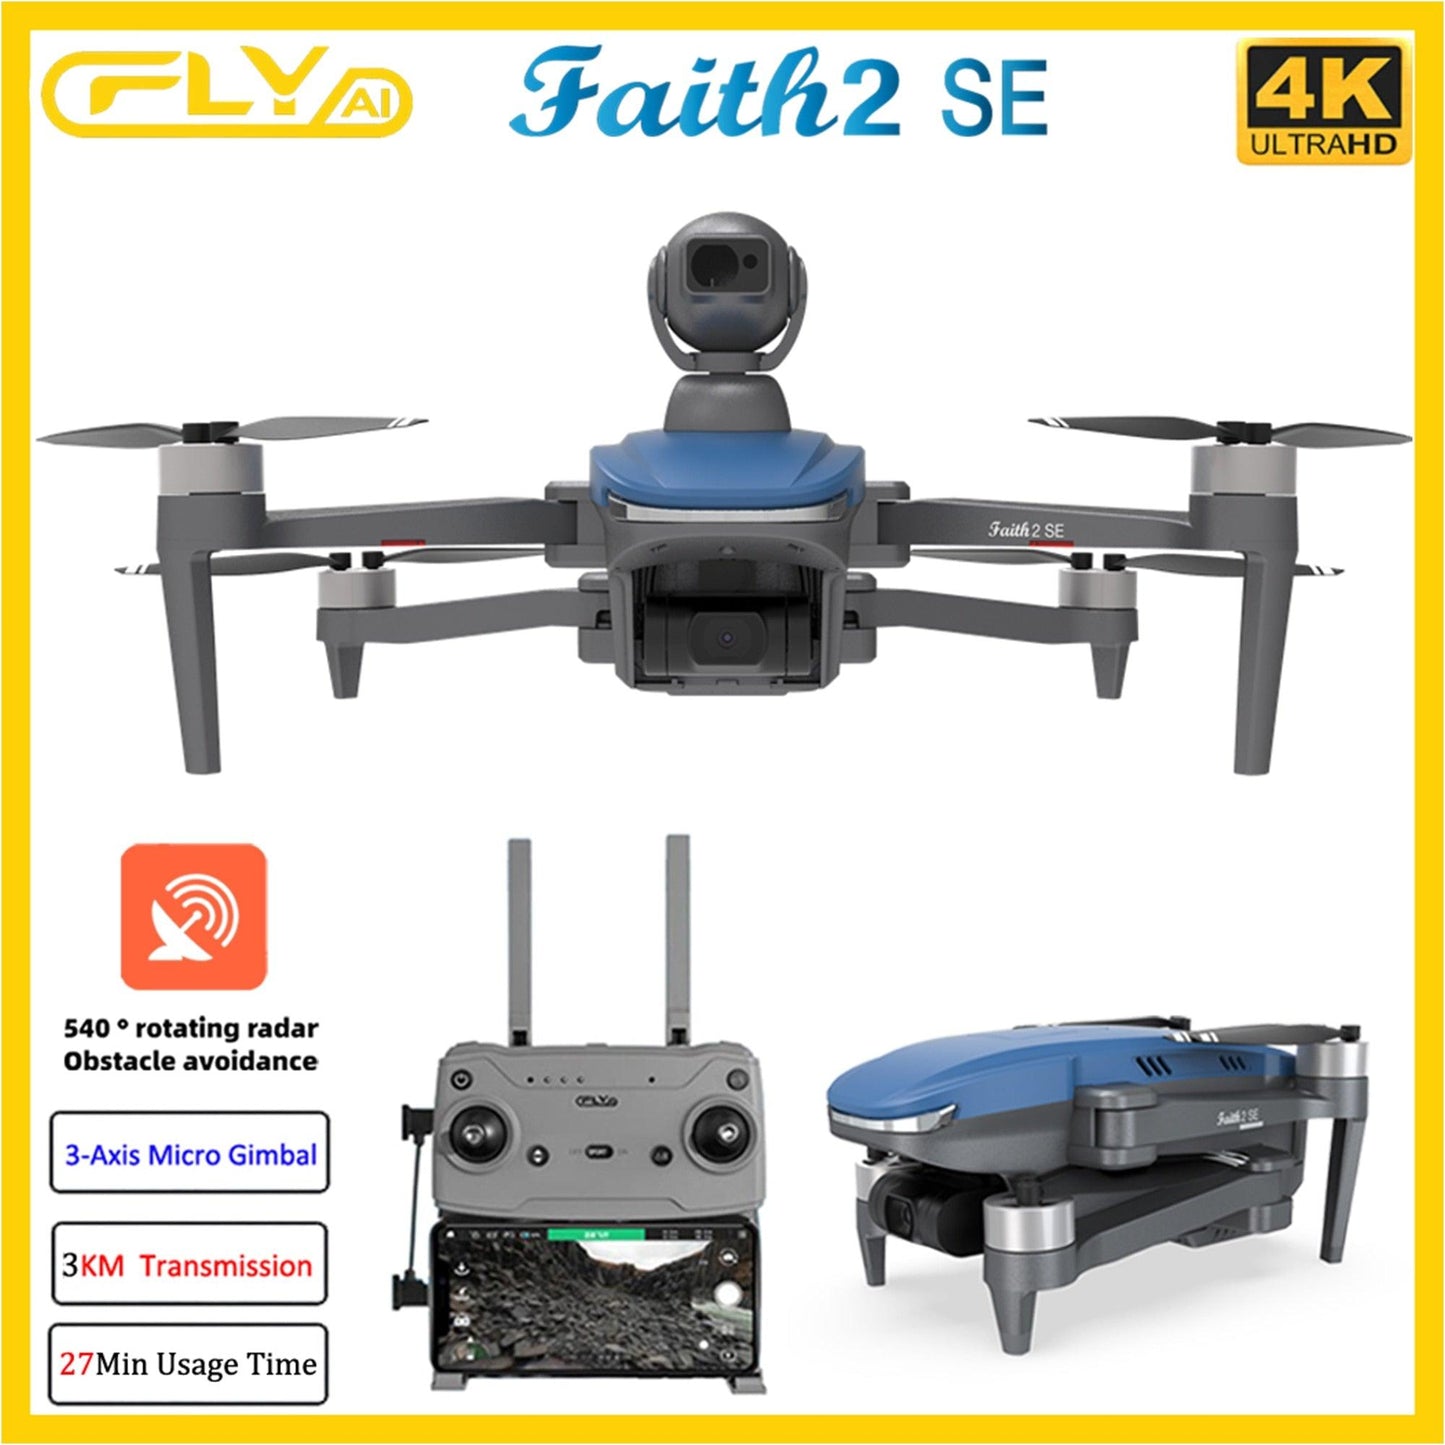 CFLY Faith2 SE Drone - 4K Profesional 3-Axis Gimbal FPV 5G Wifi GPS RC Quadcopter With Camera 540° Obstacle Avoidance Helicopter - RCDrone